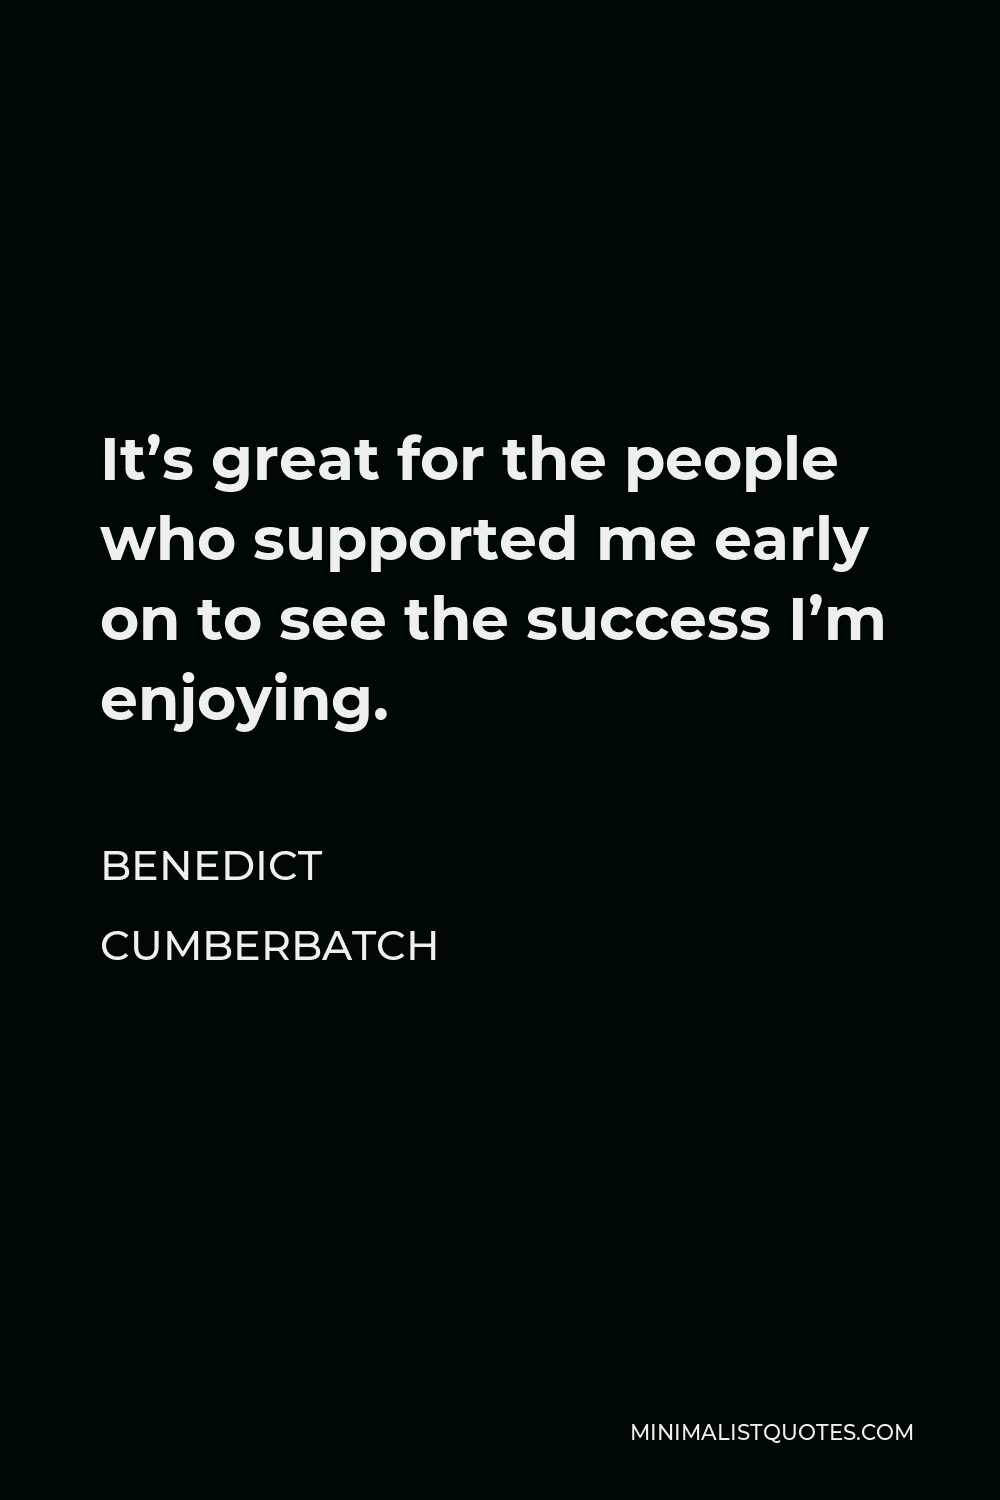 Benedict Cumberbatch Quote - It’s great for the people who supported me early on to see the success I’m enjoying.